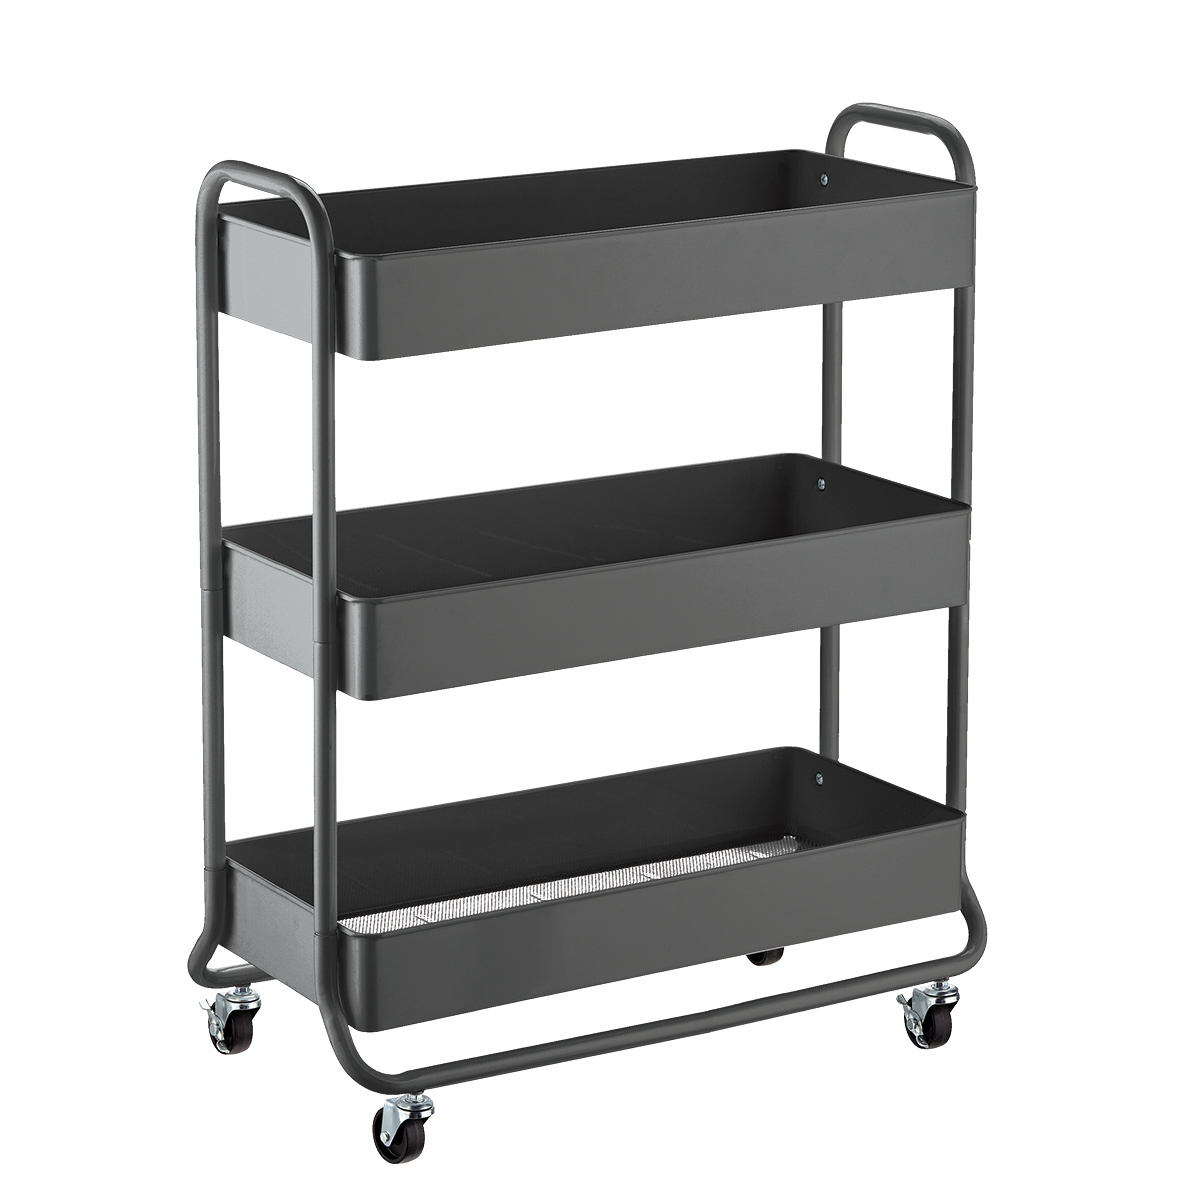 https://www.containerstore.com/catalogimages/391310/10080581-3-tier-rolling-cart-large-d.jpg